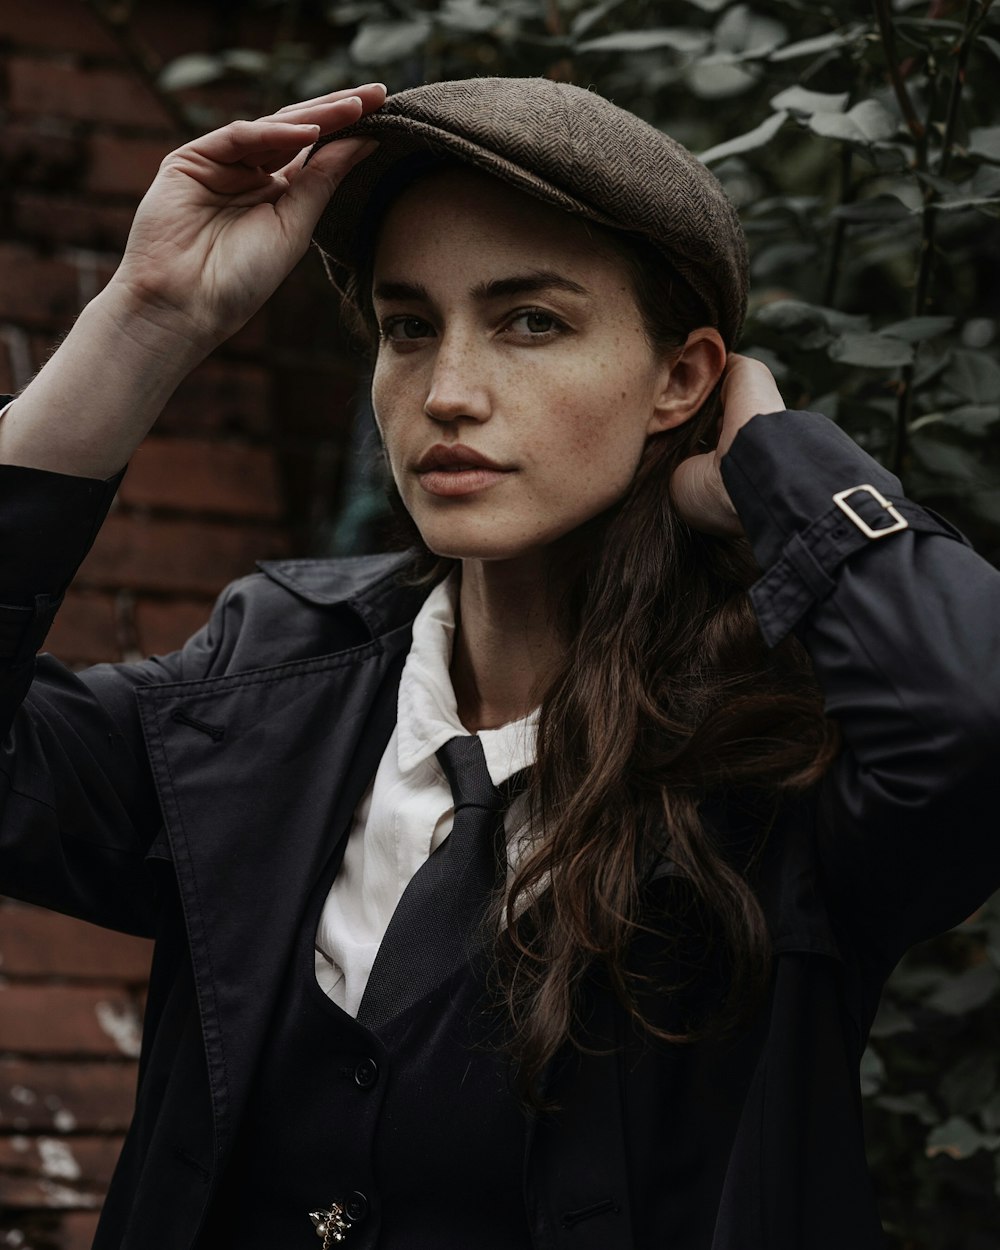 a woman wearing a hat and a jacket